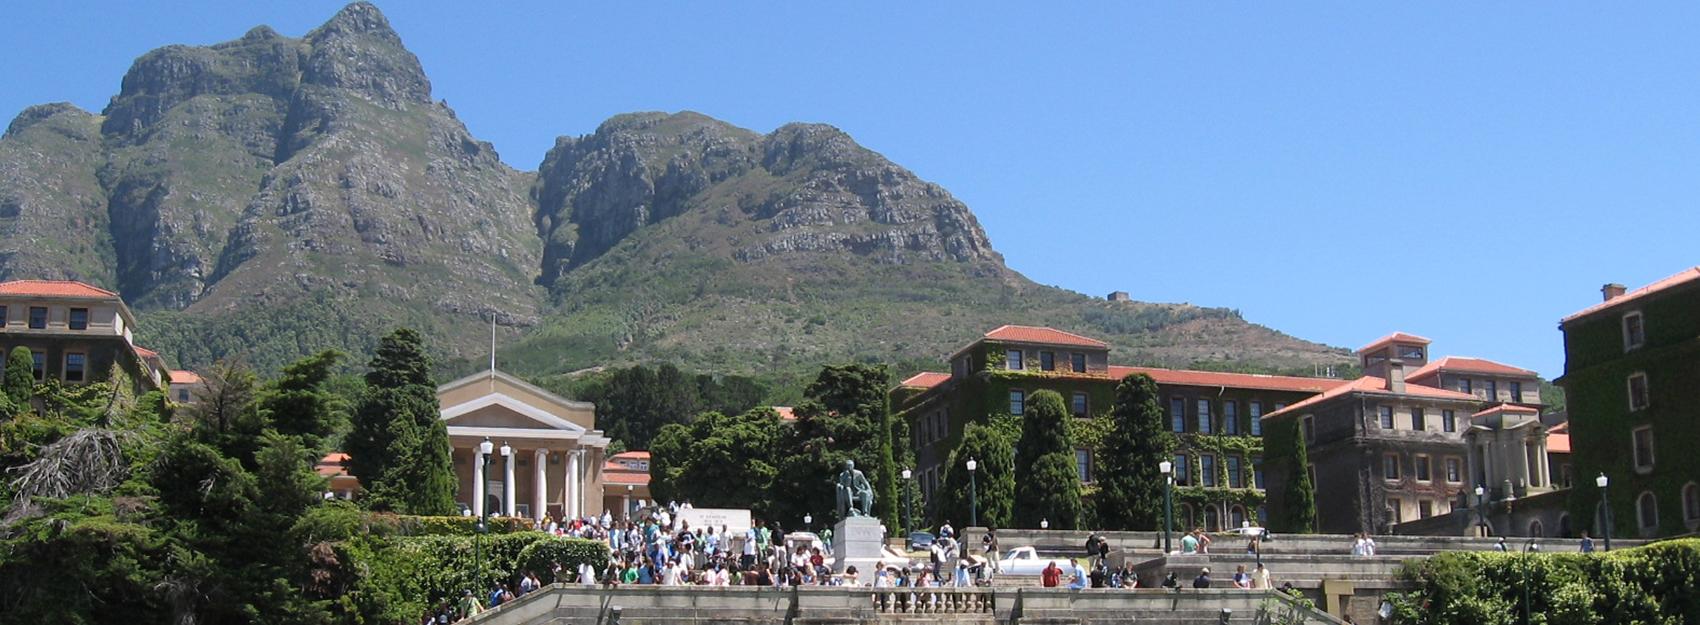 University of Cape Town Online Application